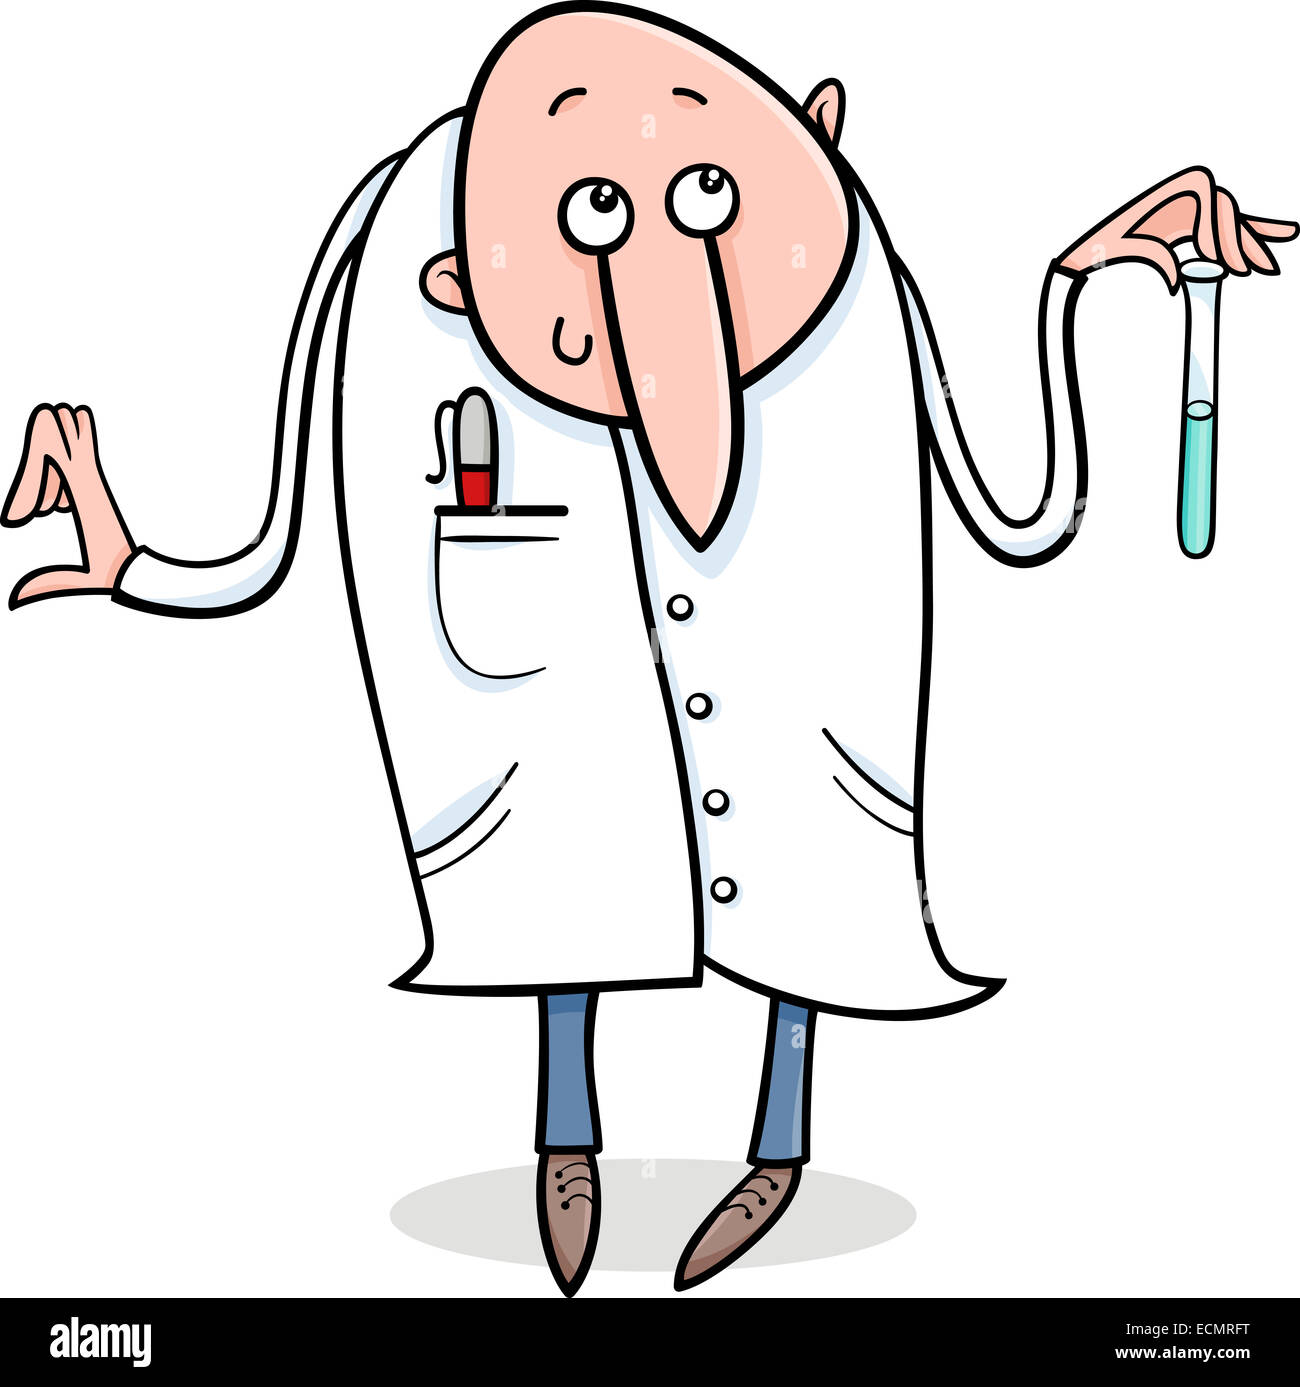 Cartoon Illustration of Funny Scientist with Mixture in Vial Stock Photo -  Alamy